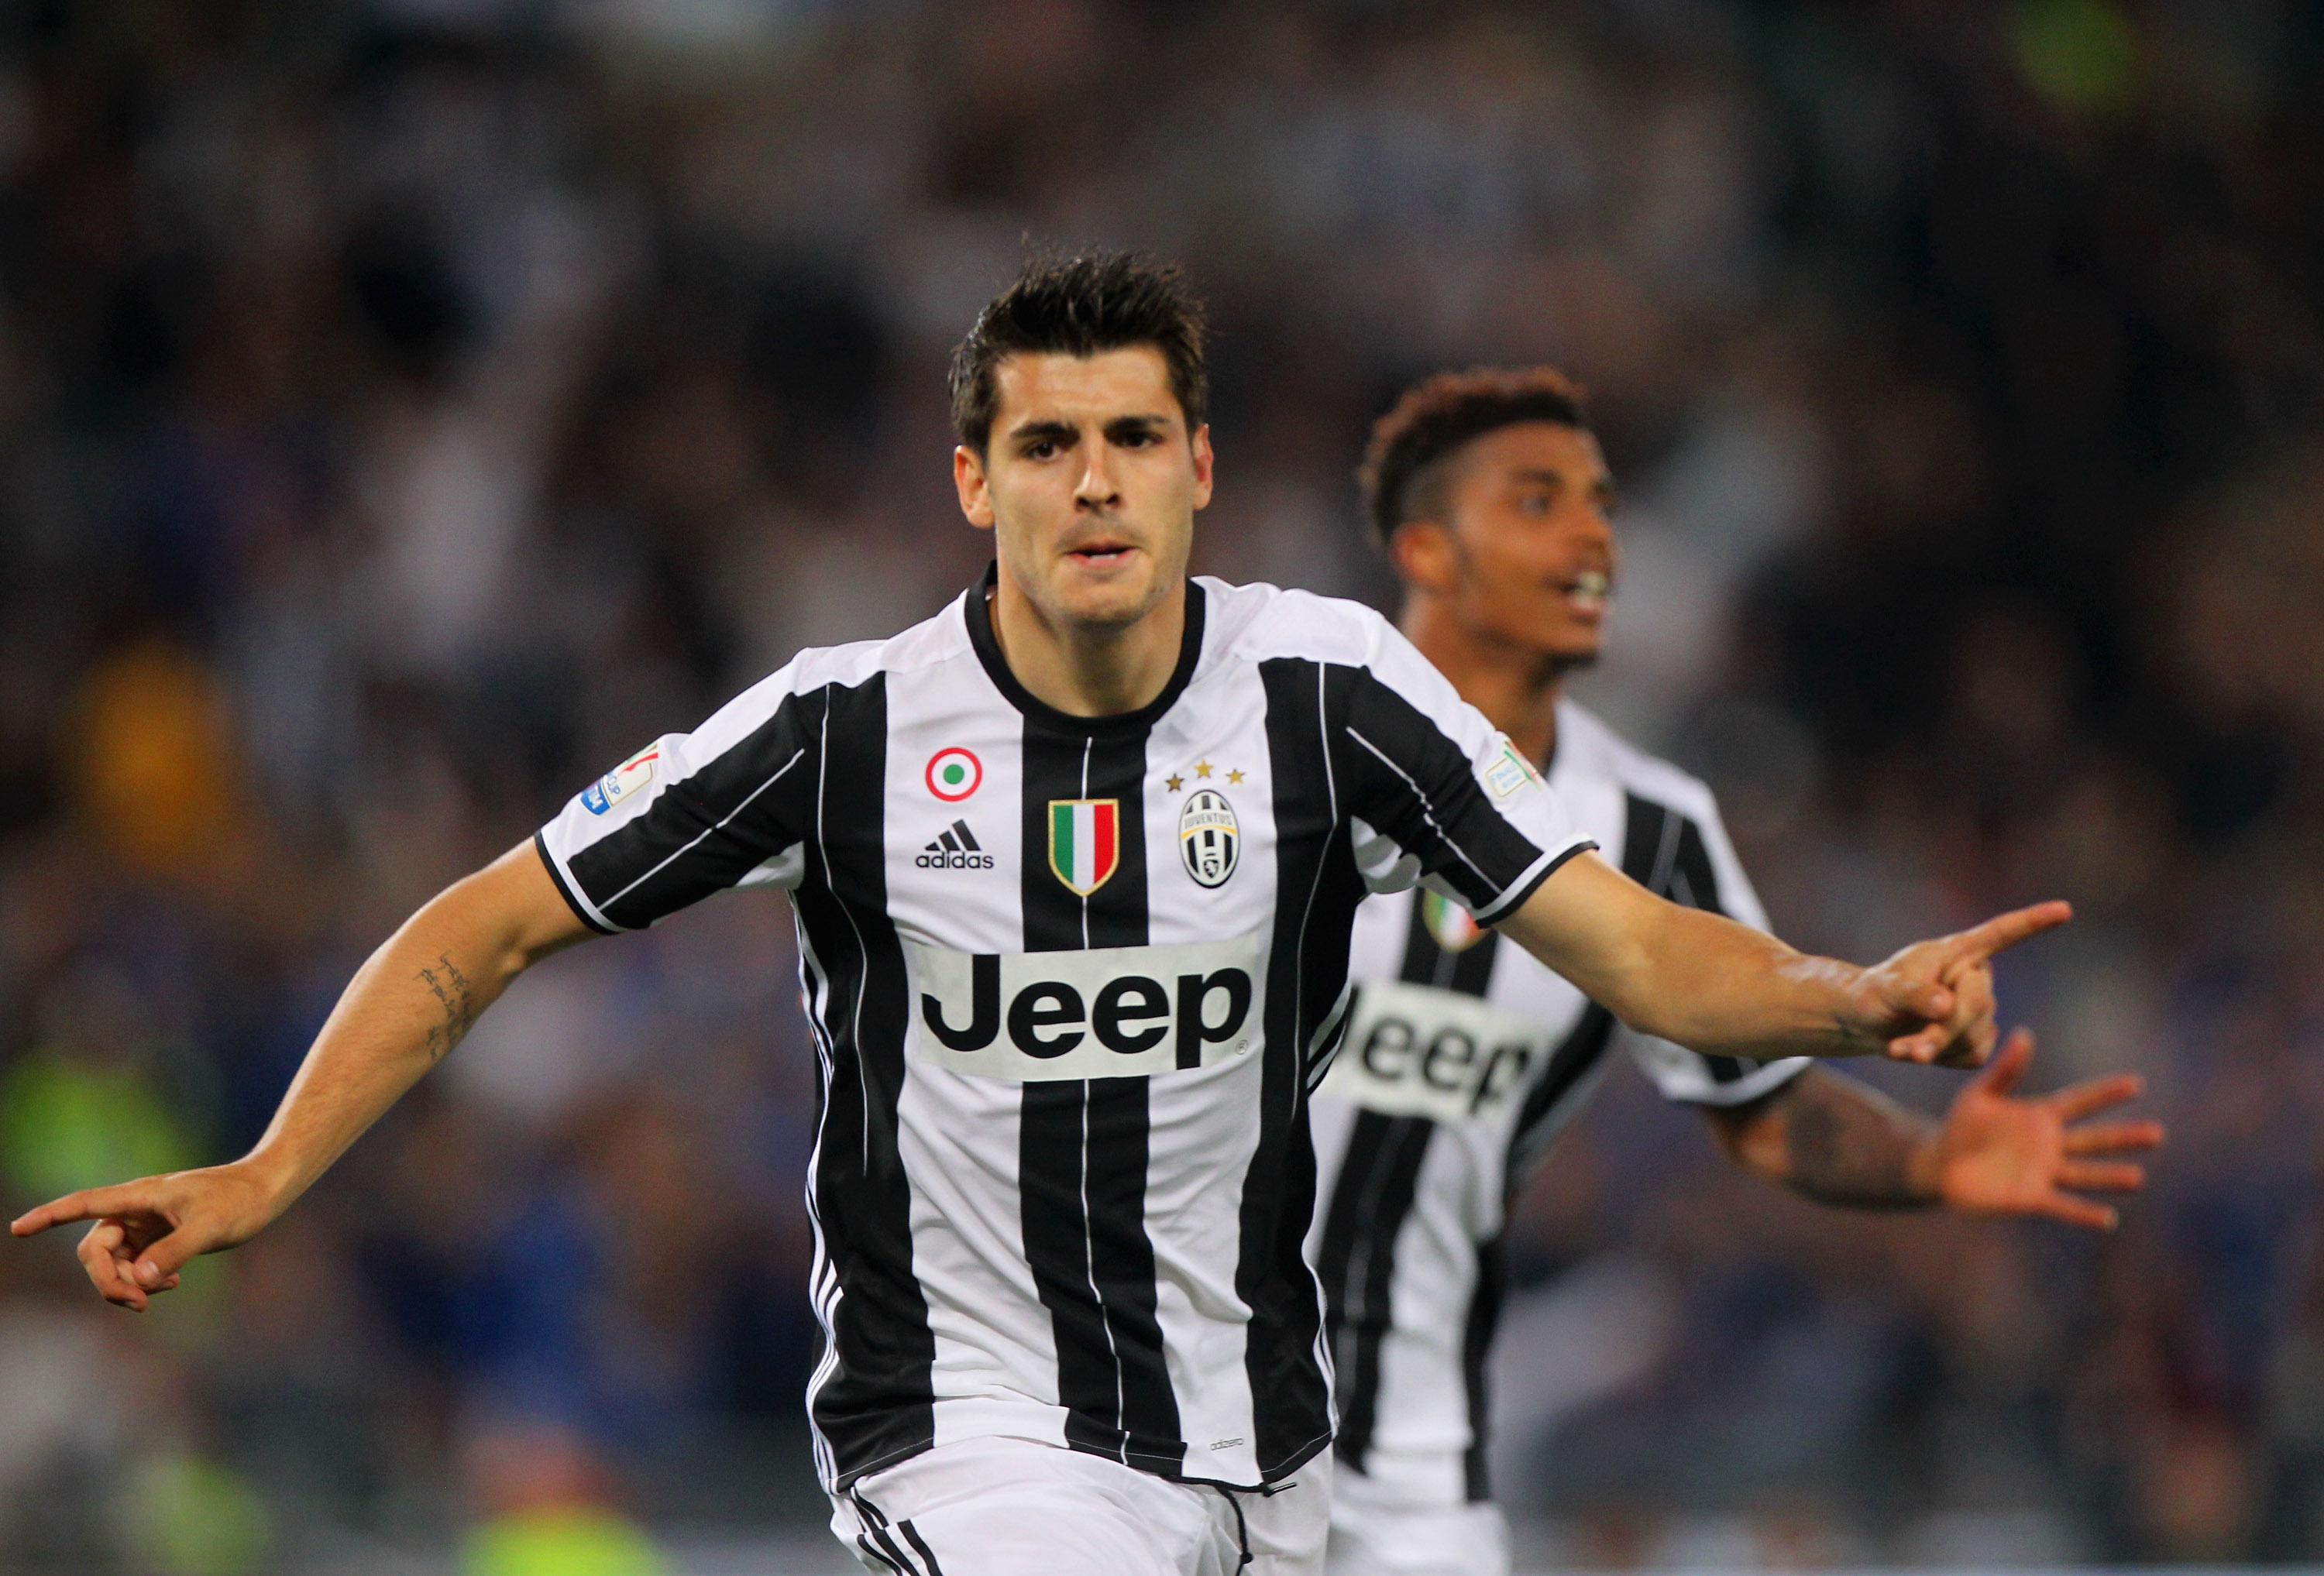 ROME, ITALY - MAY 21:  Alvaro Morata of Juventus FC celebrate after scoring the opening goal during the TIM Cup match between AC Milan and Juventus FC at Stadio Olimpico on May 21, 2016 in Rome, Italy.  (Photo by Paolo Bruno/Getty Images)